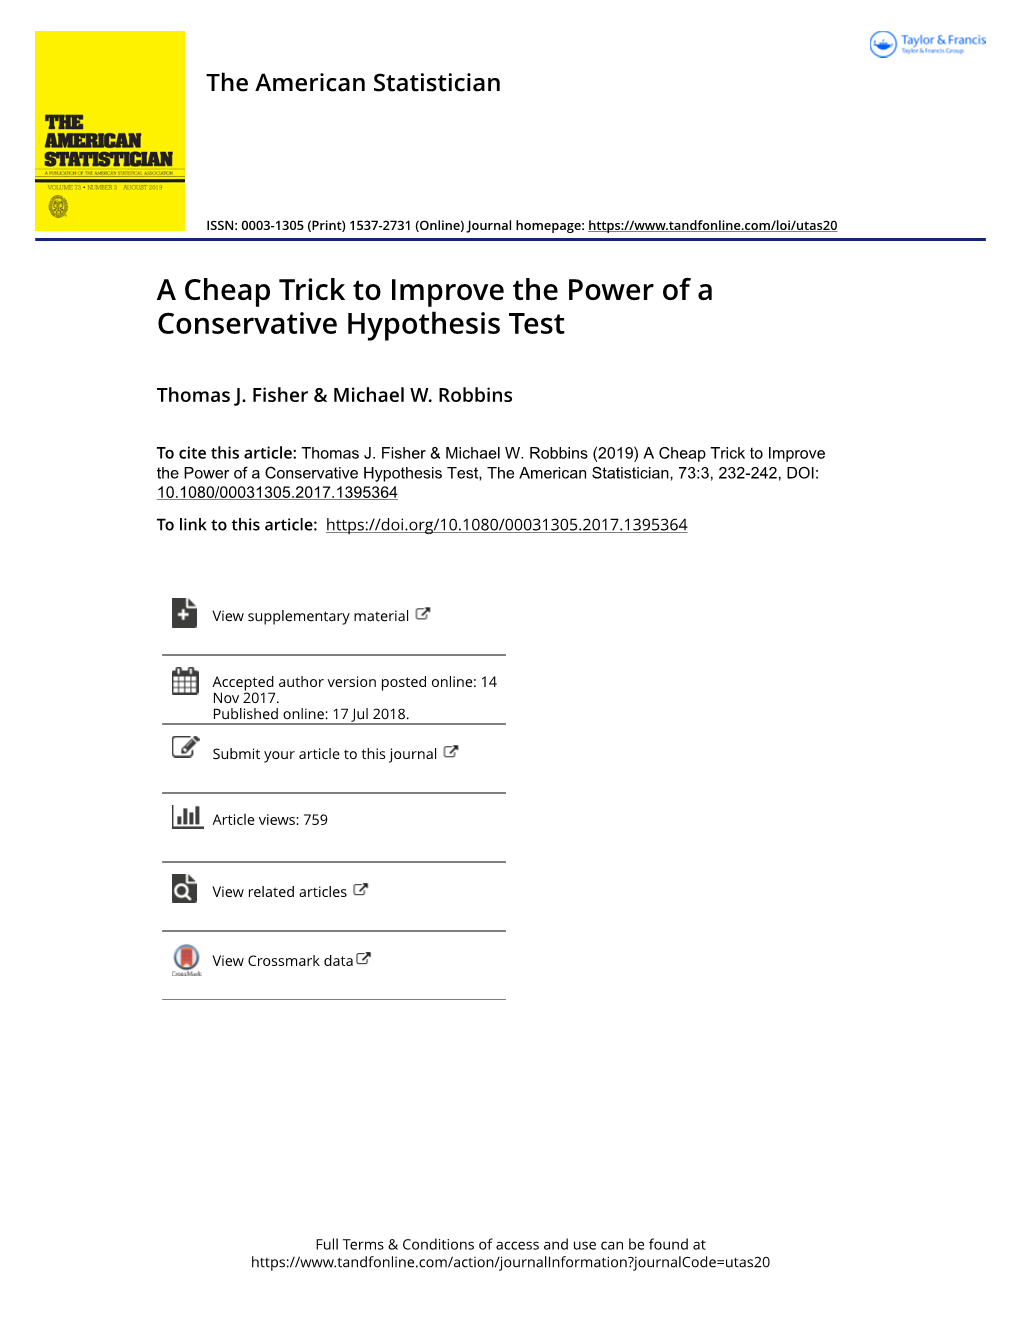 A Cheap Trick to Improve the Power of a Conservative Hypothesis Test